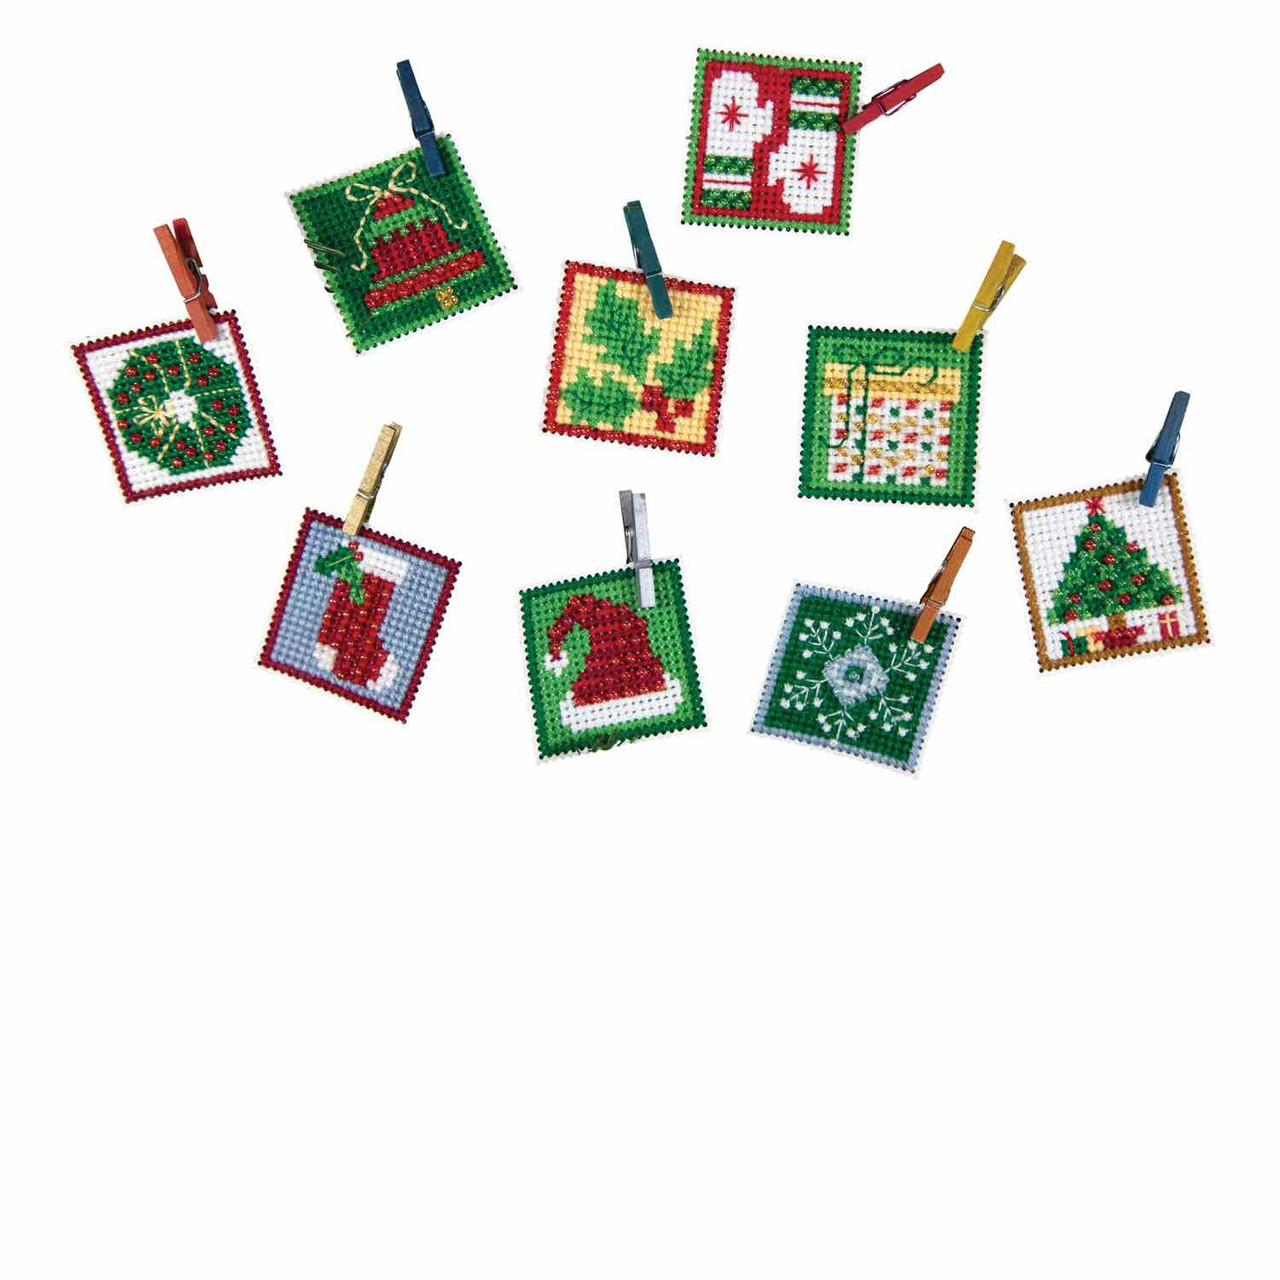 Advent Trilogy Set Two Beaded Cross Stitch Ornaments Kit 2019 Mill Hill MH191912